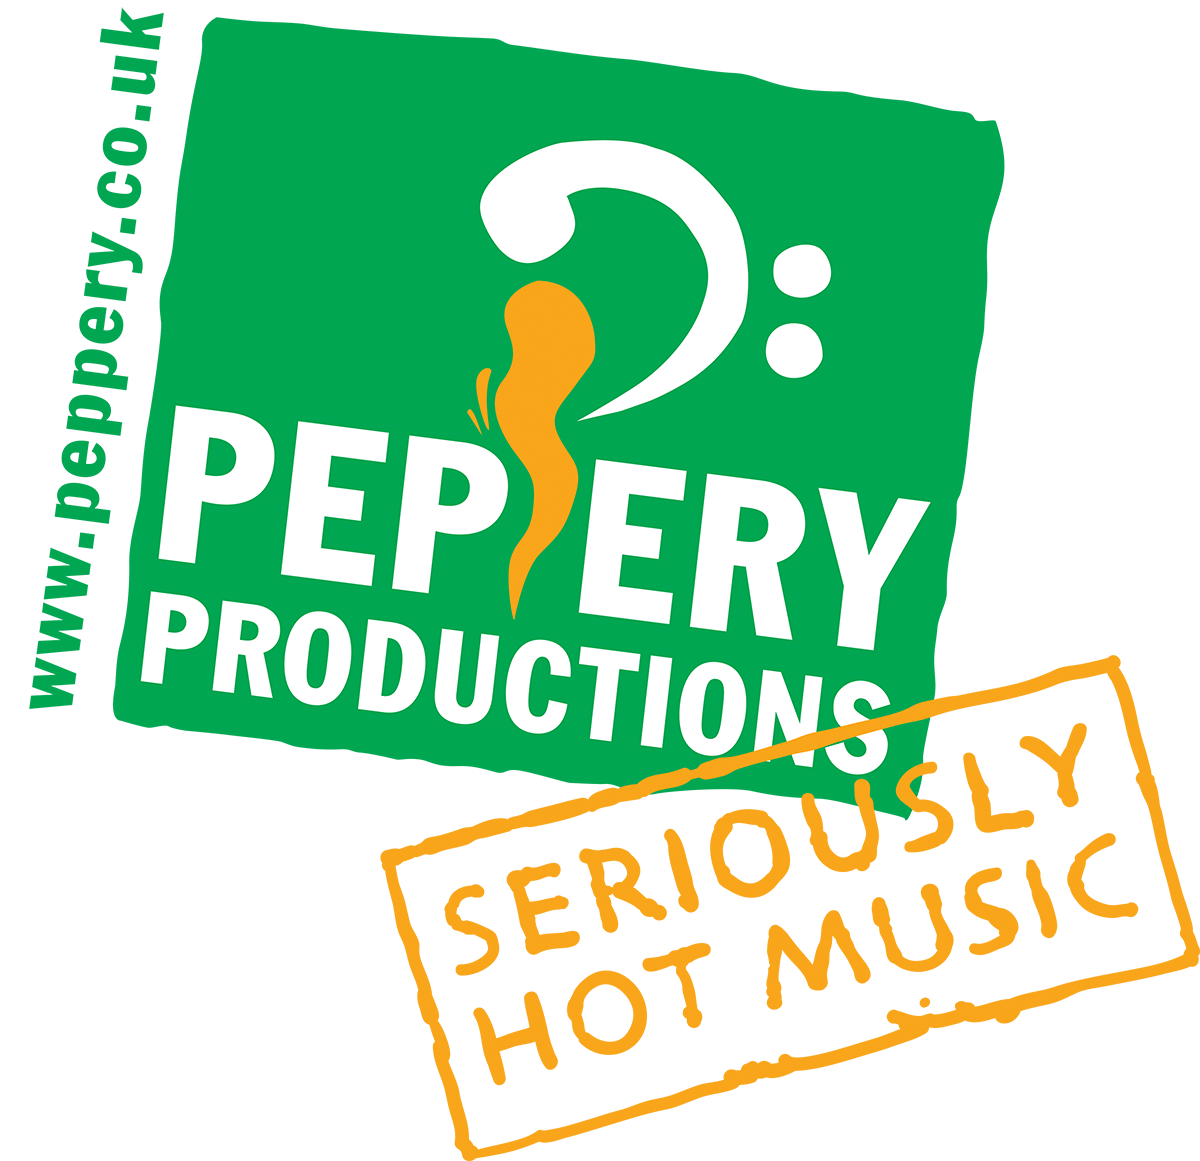 Peppery Productions